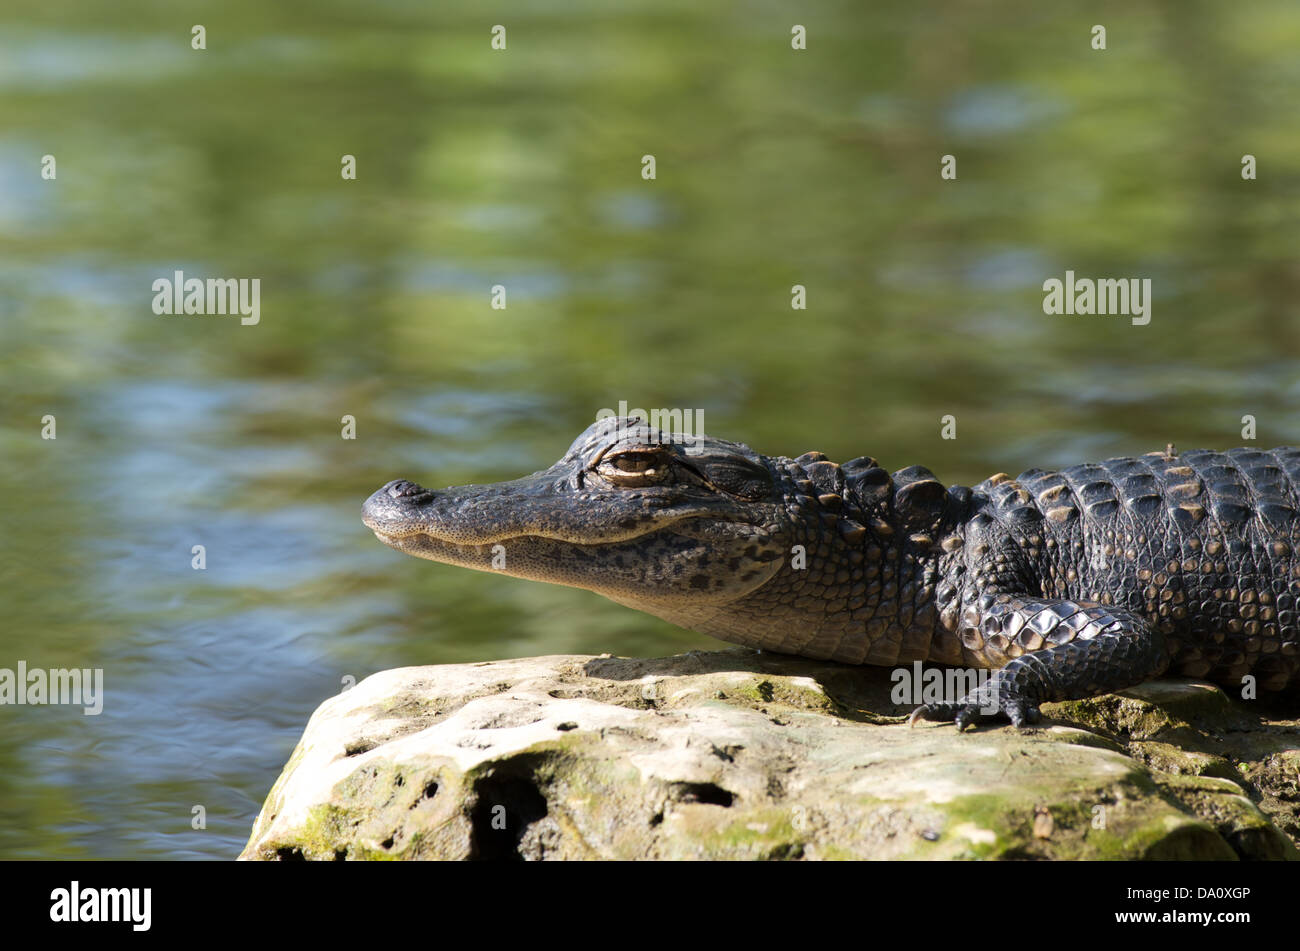 A young American Alligator (Alligator mississippiensis) warming in the morning sun in Everglades National Park, Florida. Stock Photo